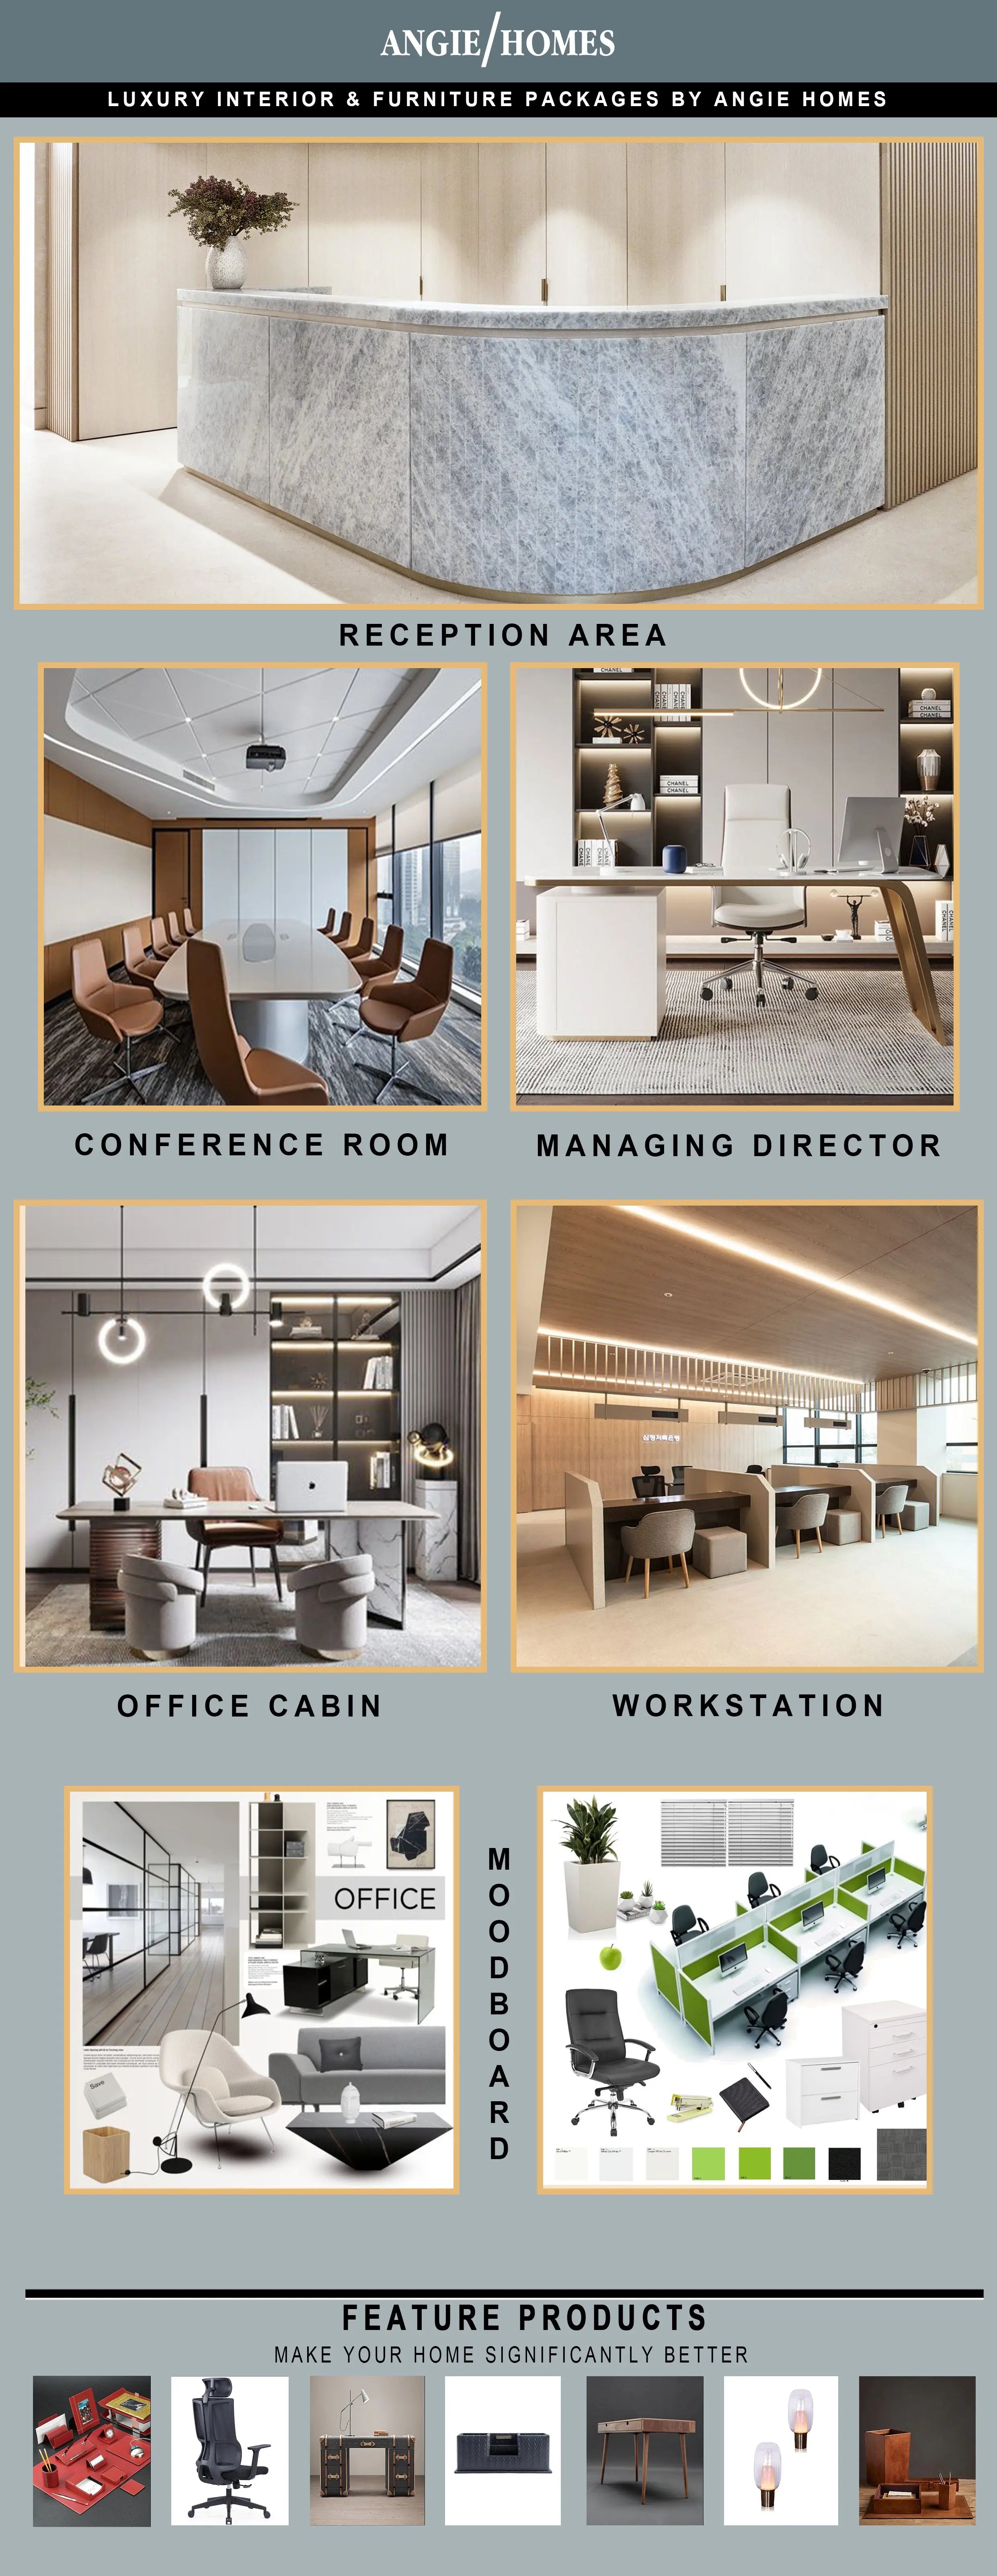 Paras Small Office Interiors ANGIE HOMES